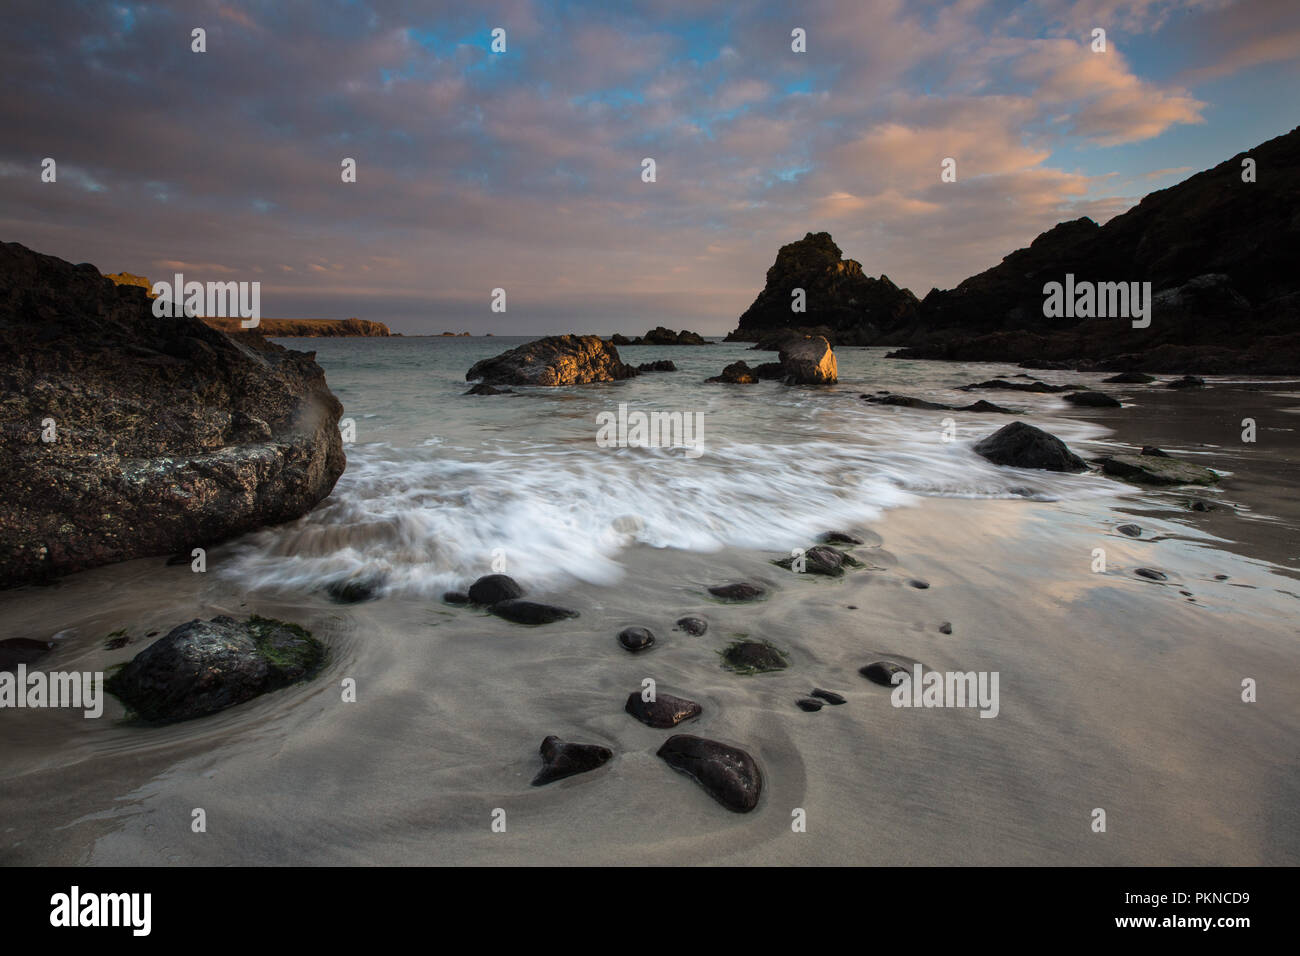 A view of the sandy beach and waves rushing over rocks at Kynance Cove in Cornwall, UK Stock Photo